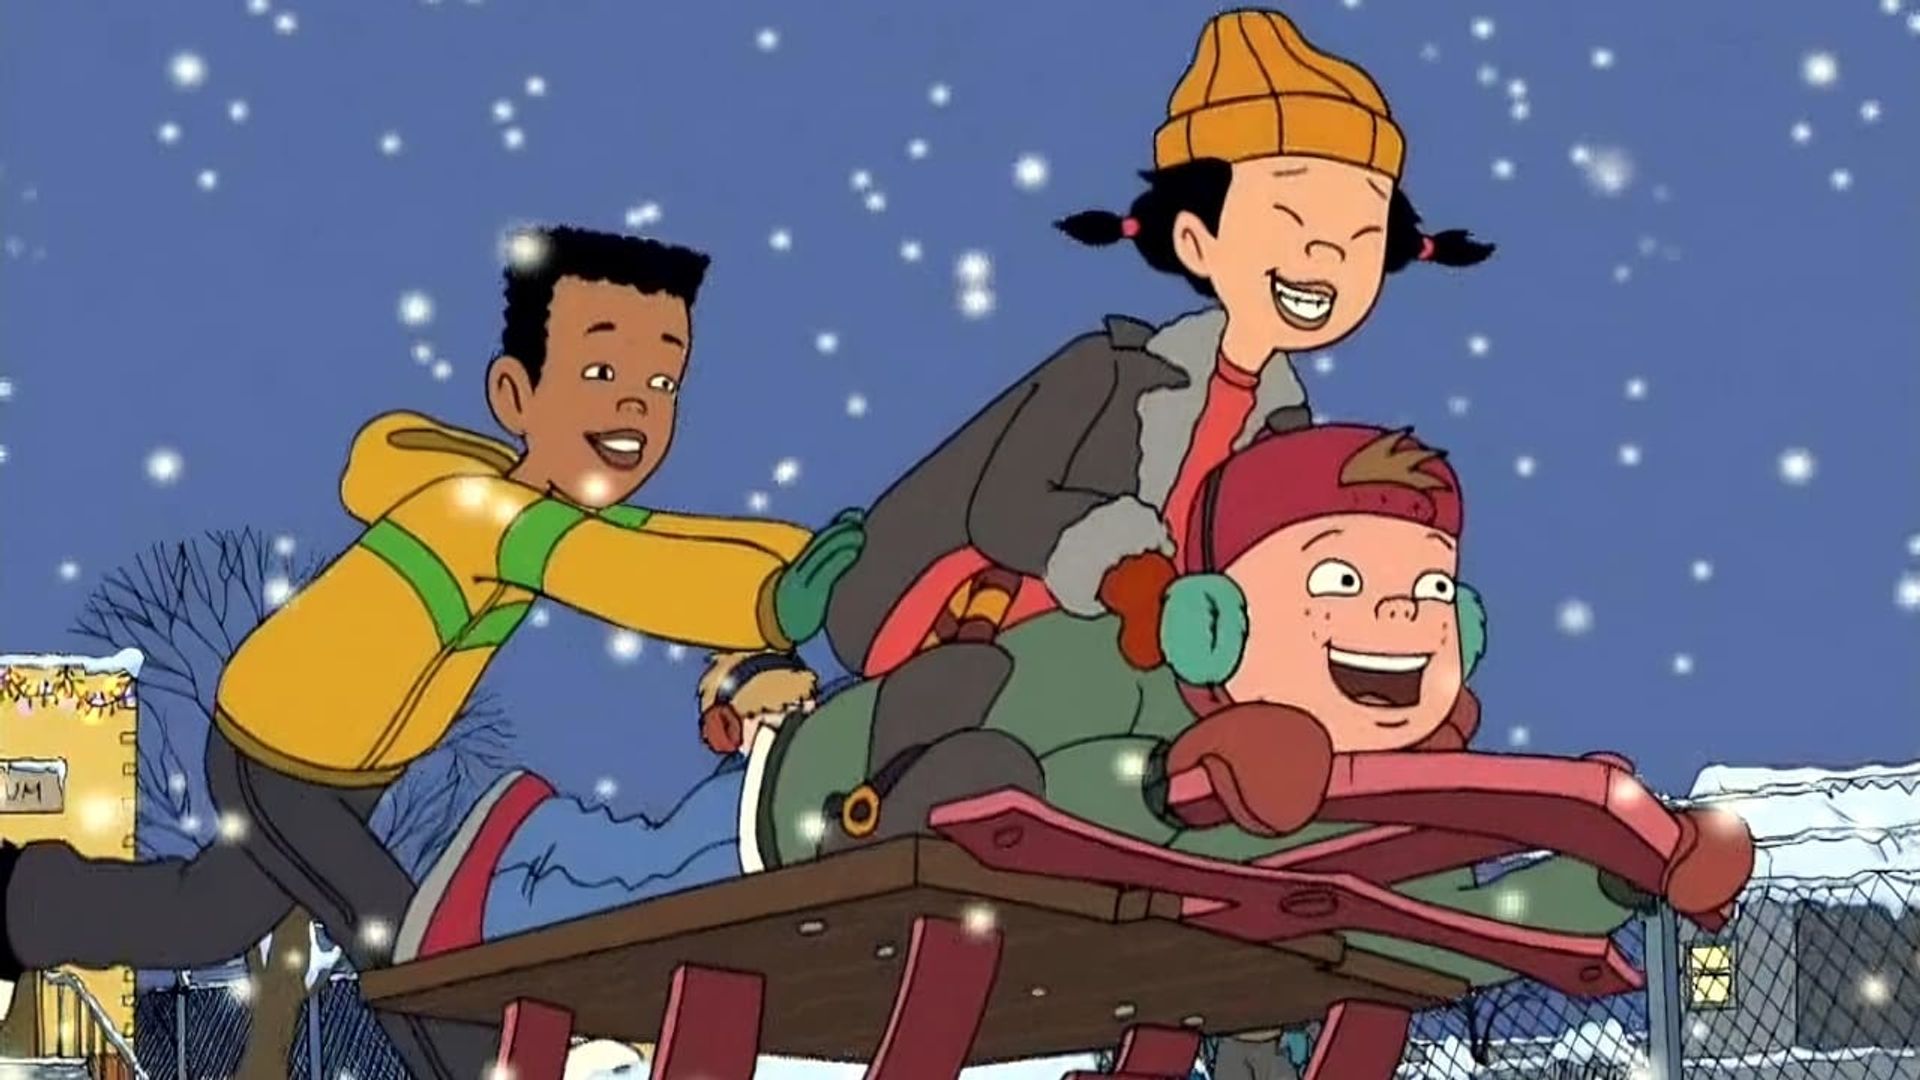 Recess Christmas: Miracle on Third Street background